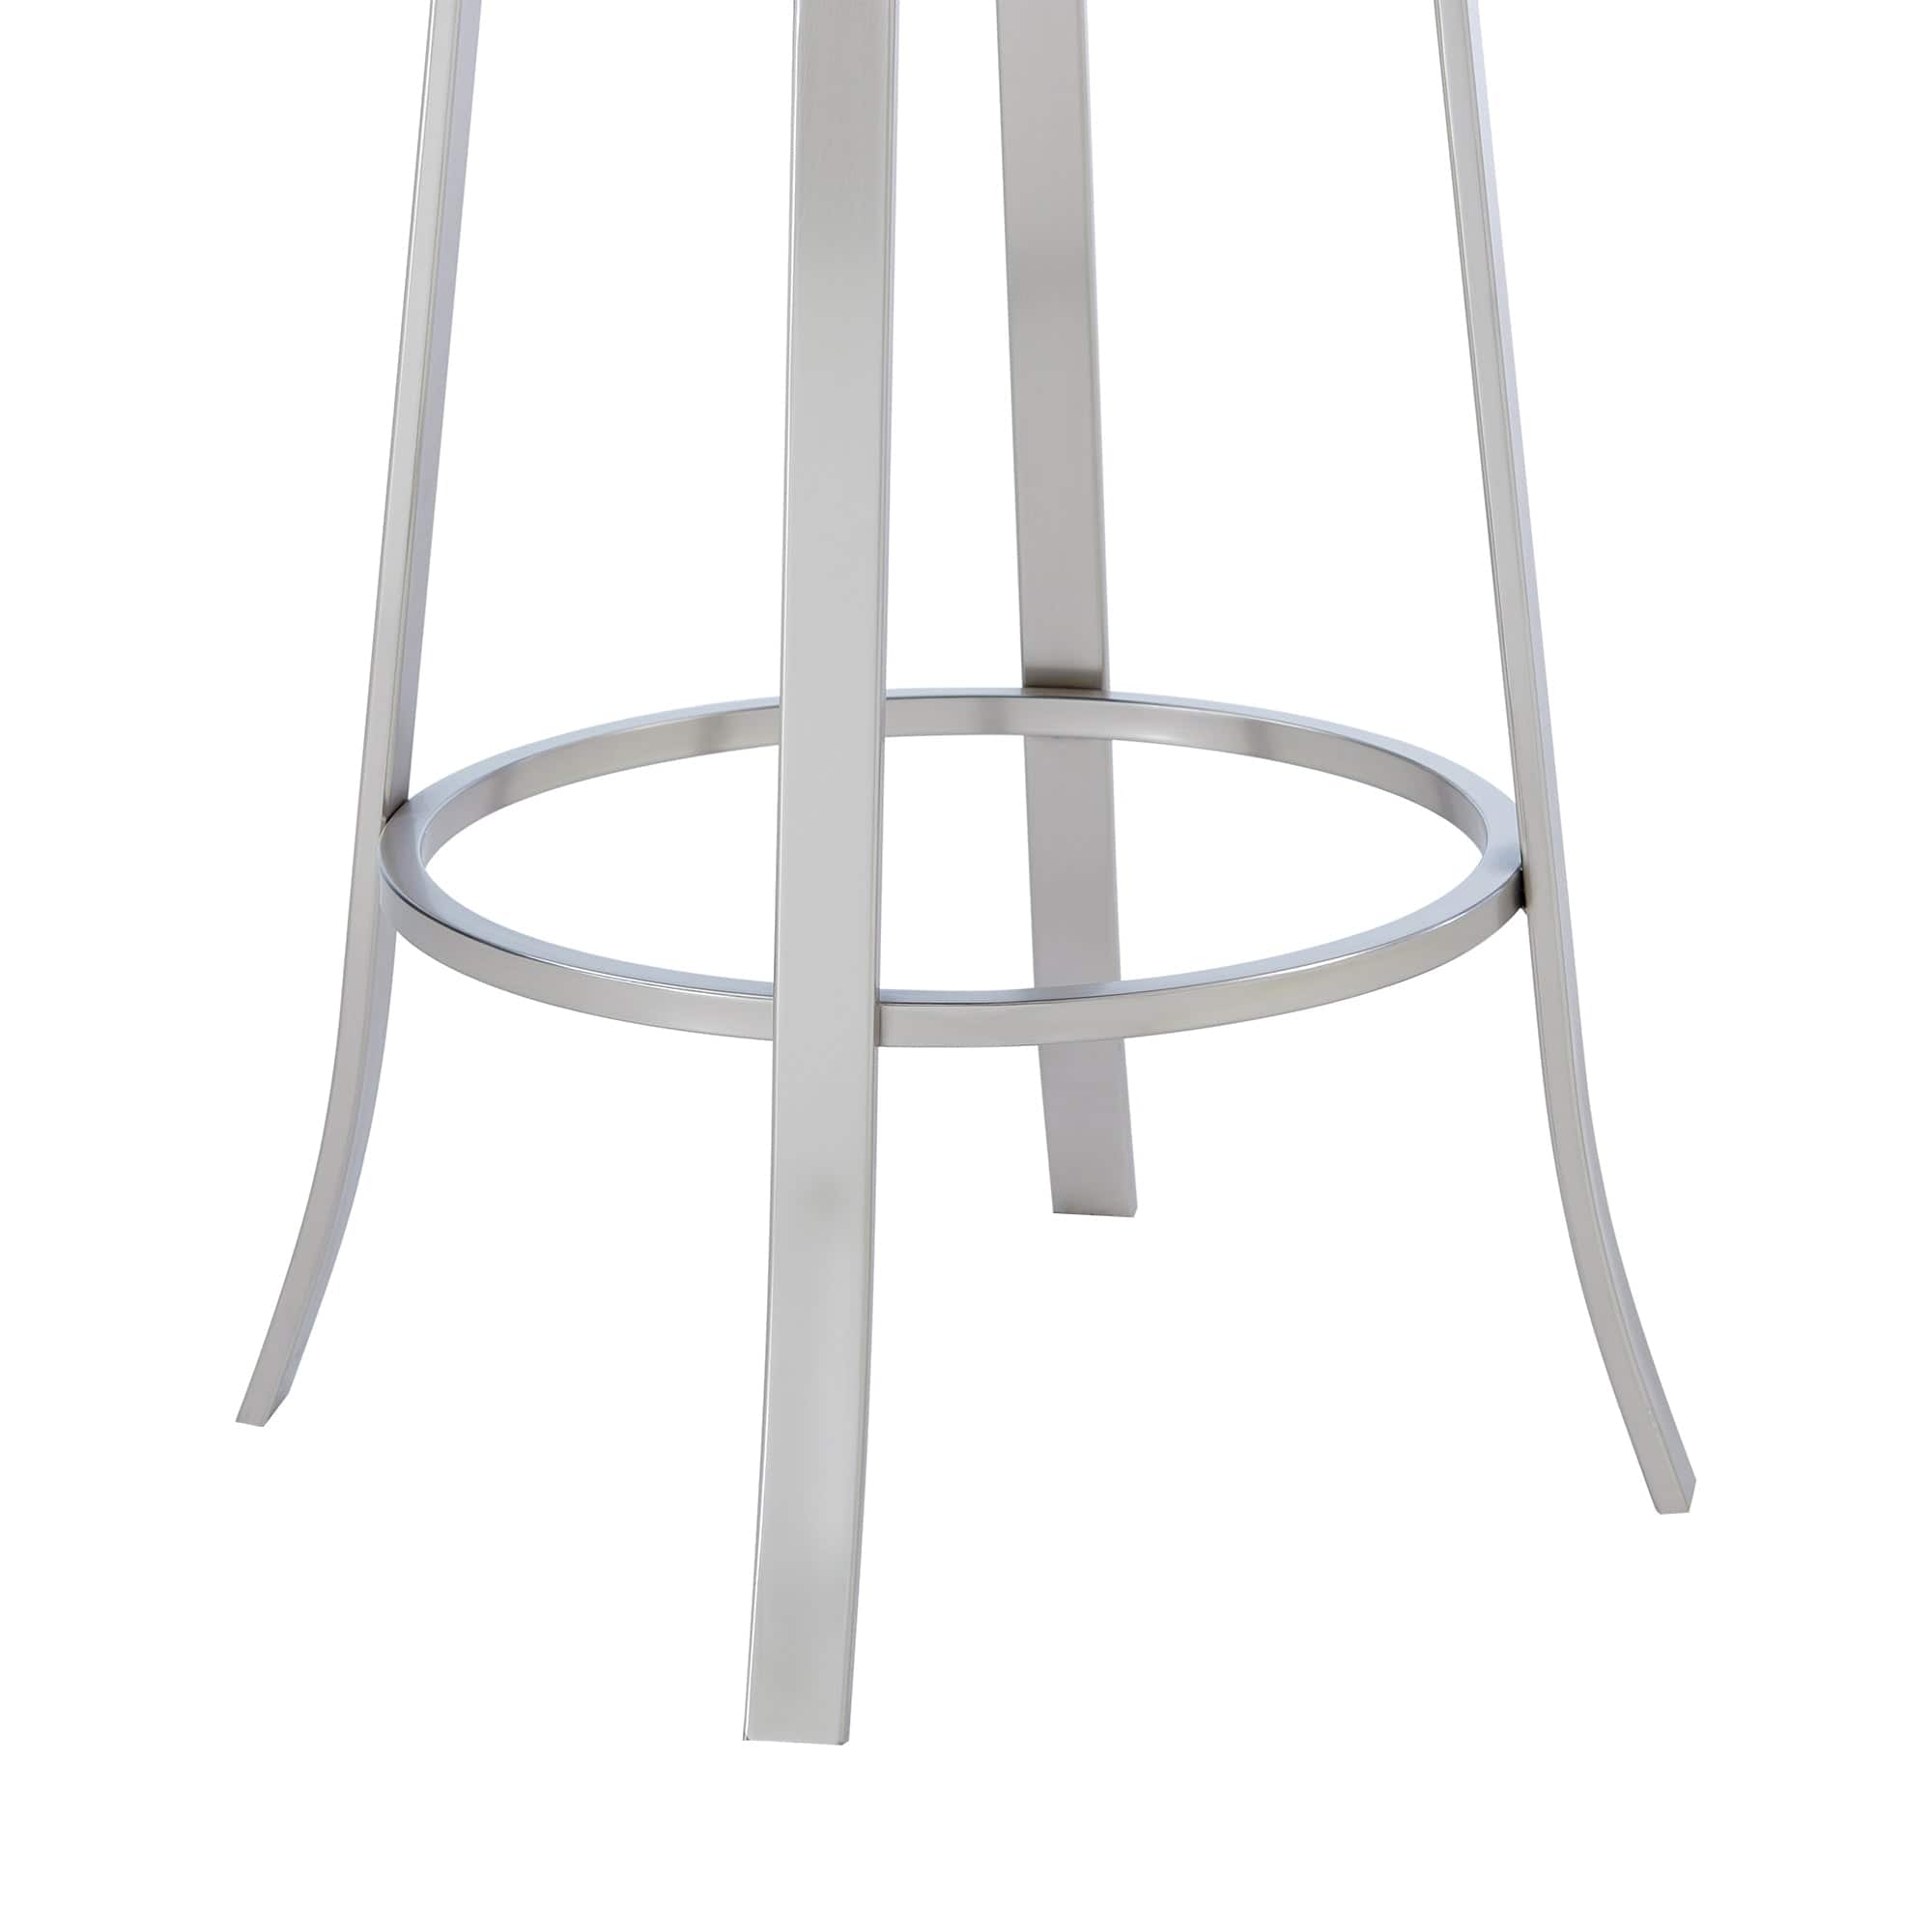 Armen Living Barstool Armen Living - Lola Contemporary 30" Bar Height Barstool in Brushed Stainless Steel Finish and Gray Faux Leather | LCLLBABSGR30